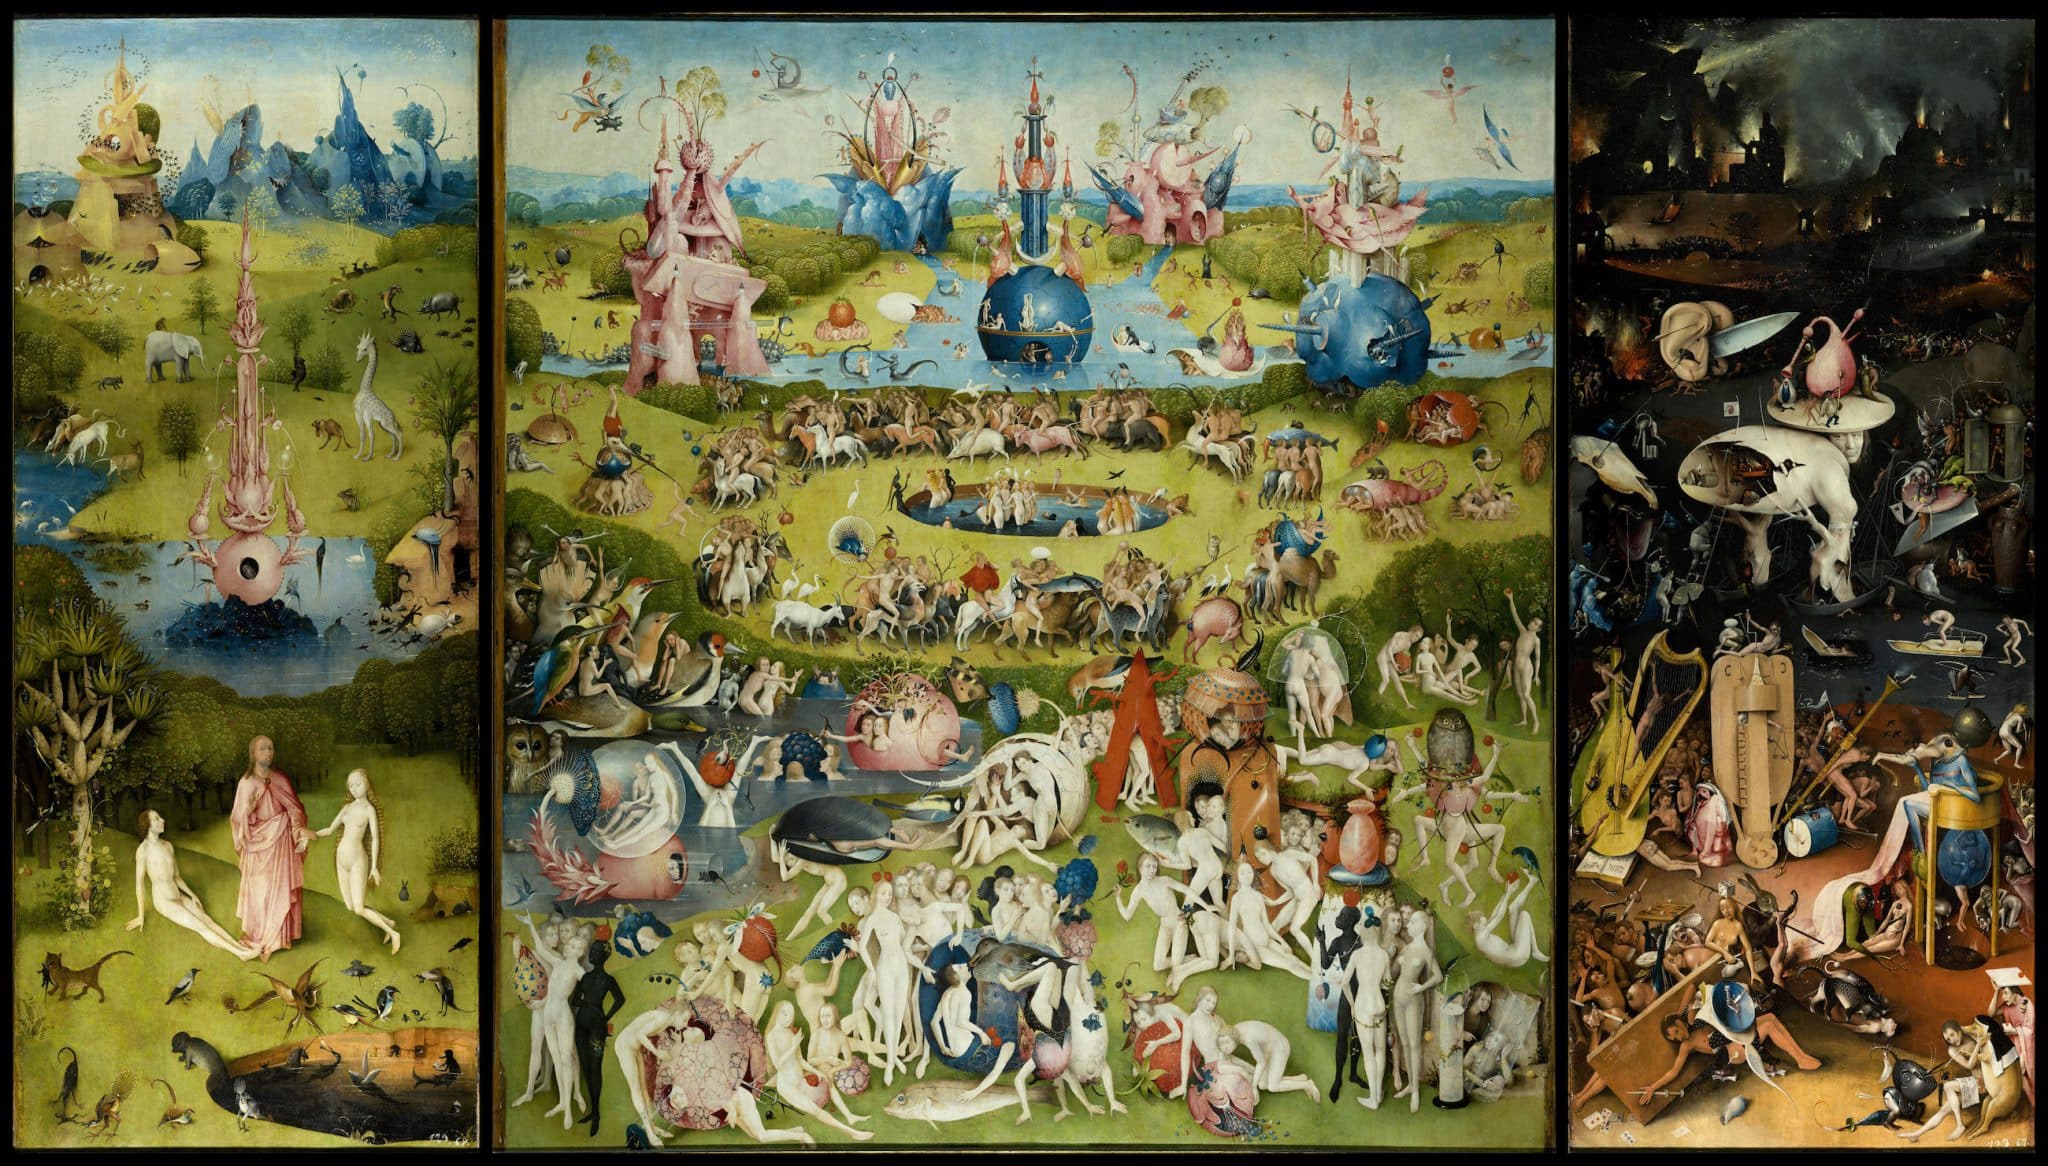 Hieronymous Bosch's painting depecting Eden, temptation and Hell, The Garden of Earthly Delights